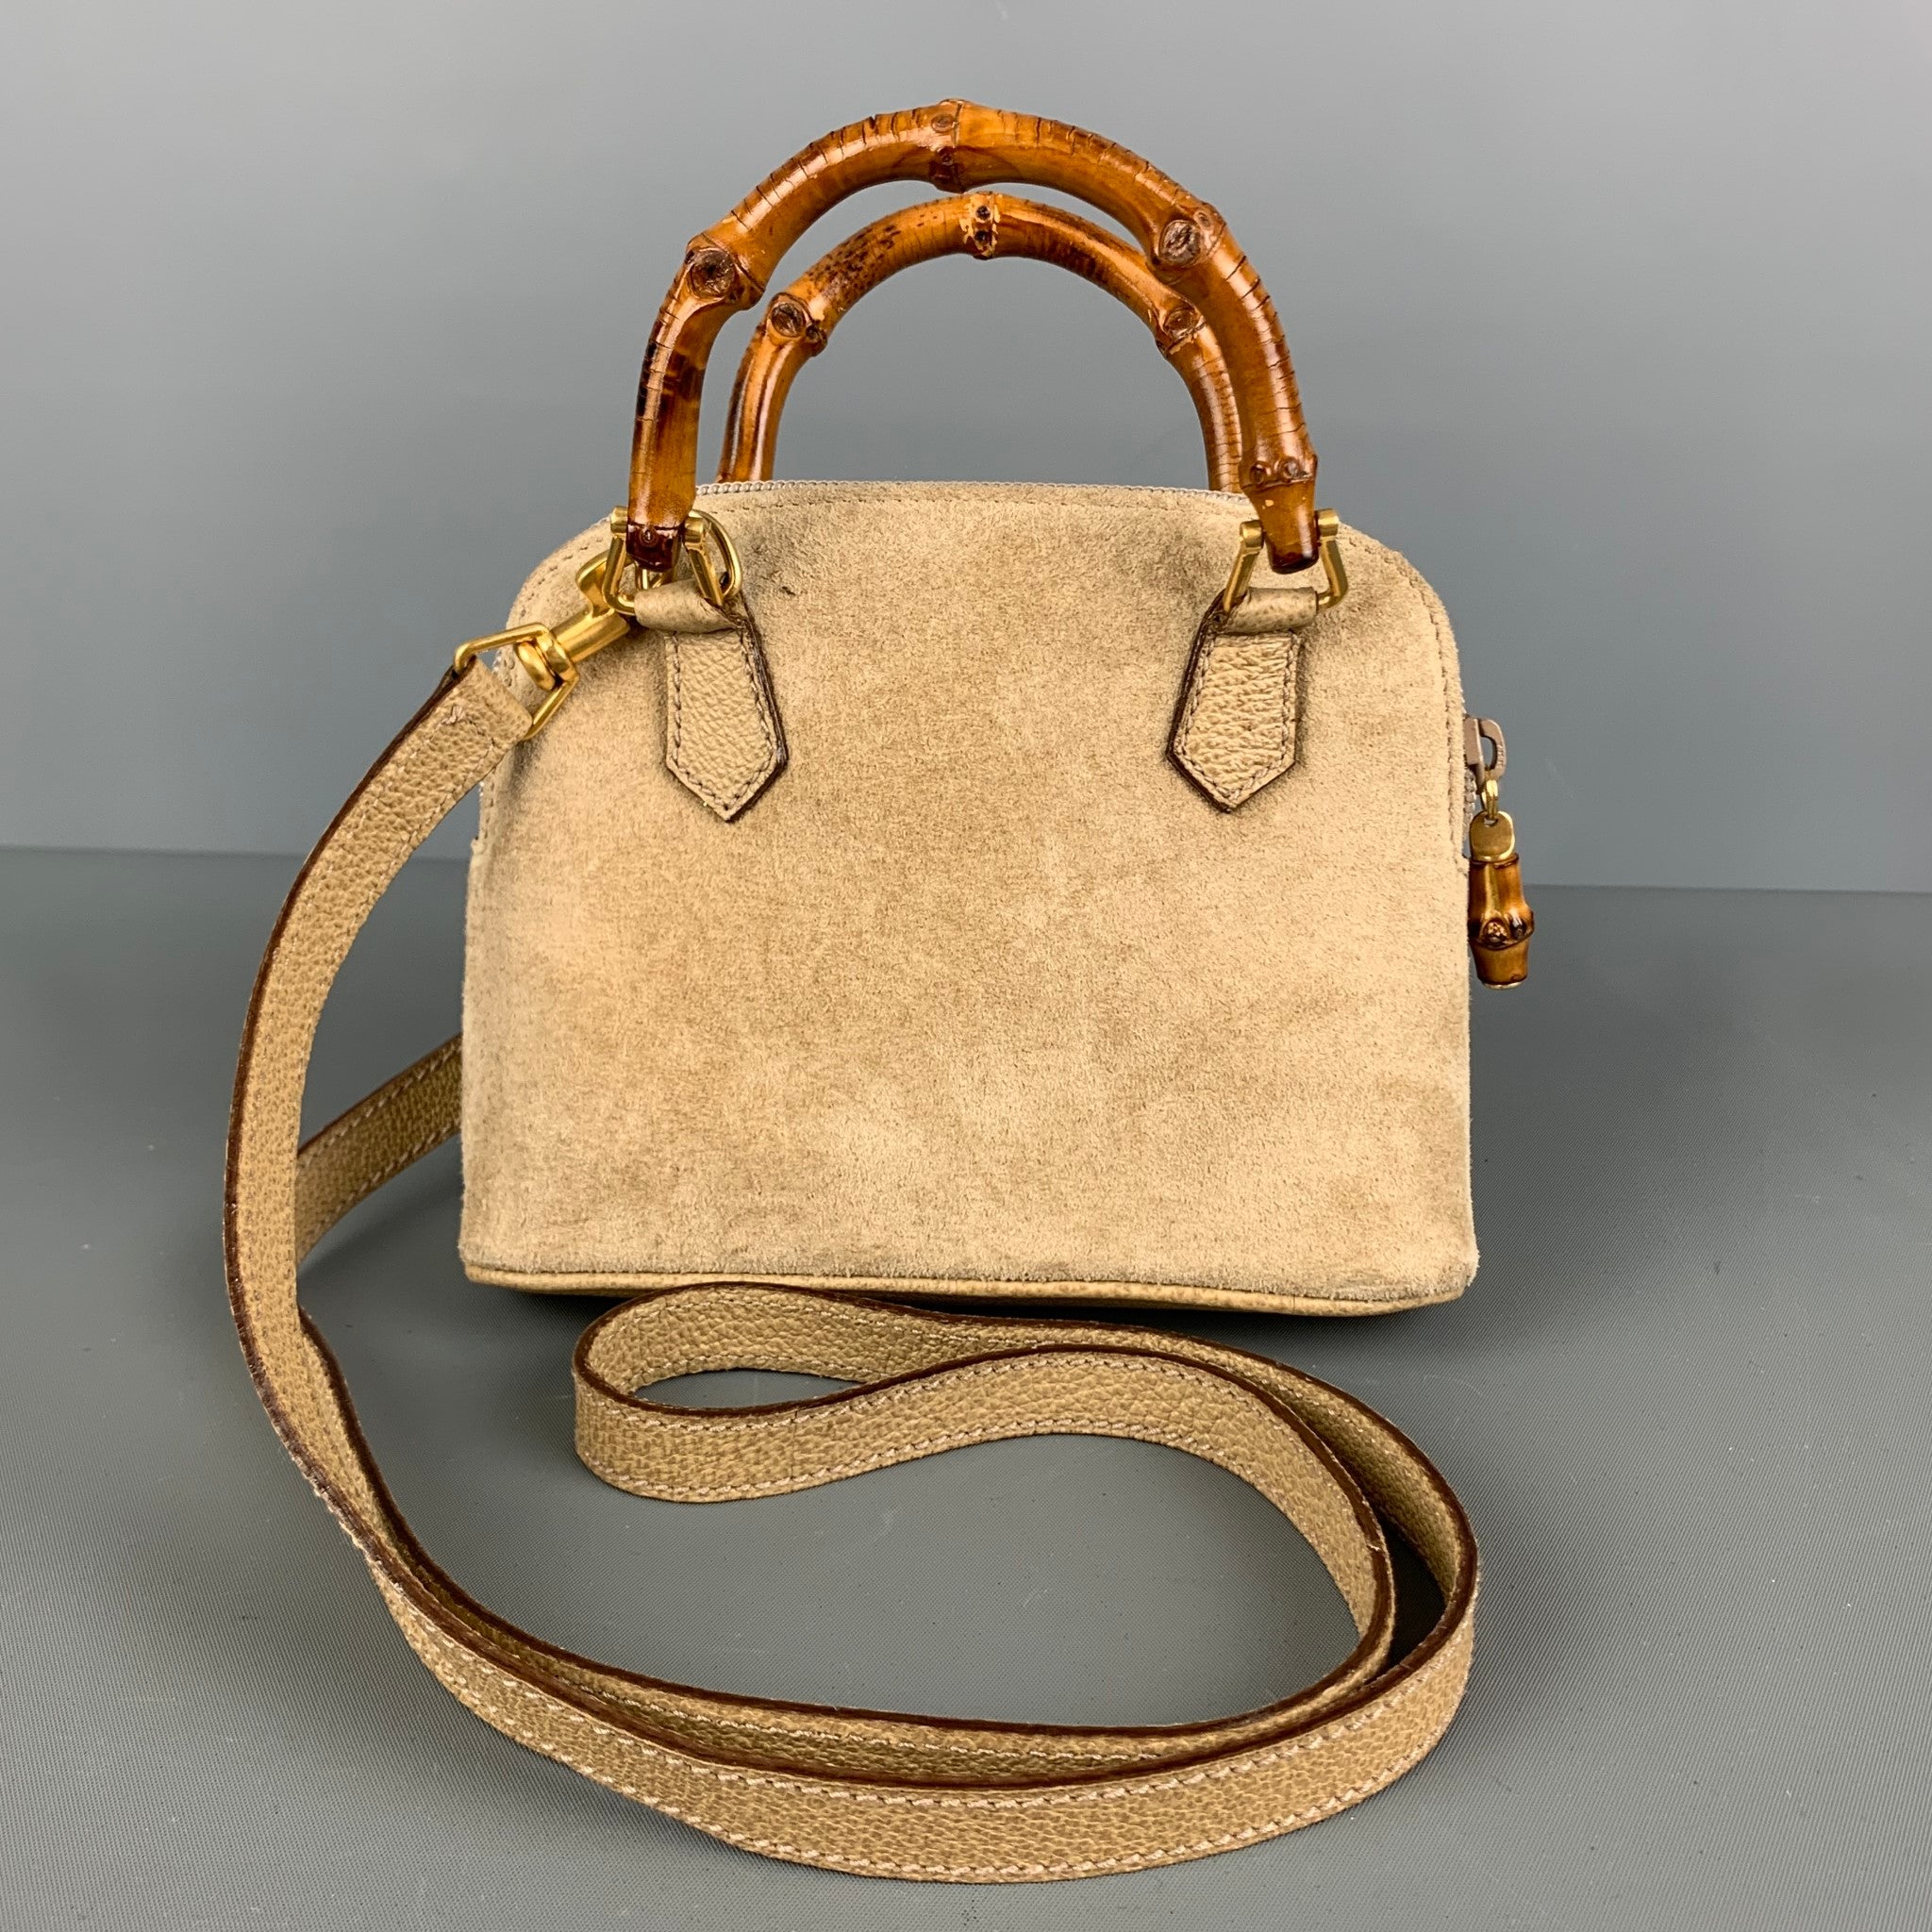 VINTAGE GUCCI BAMBOO TOP HANDLE TAN LEATHER BAG